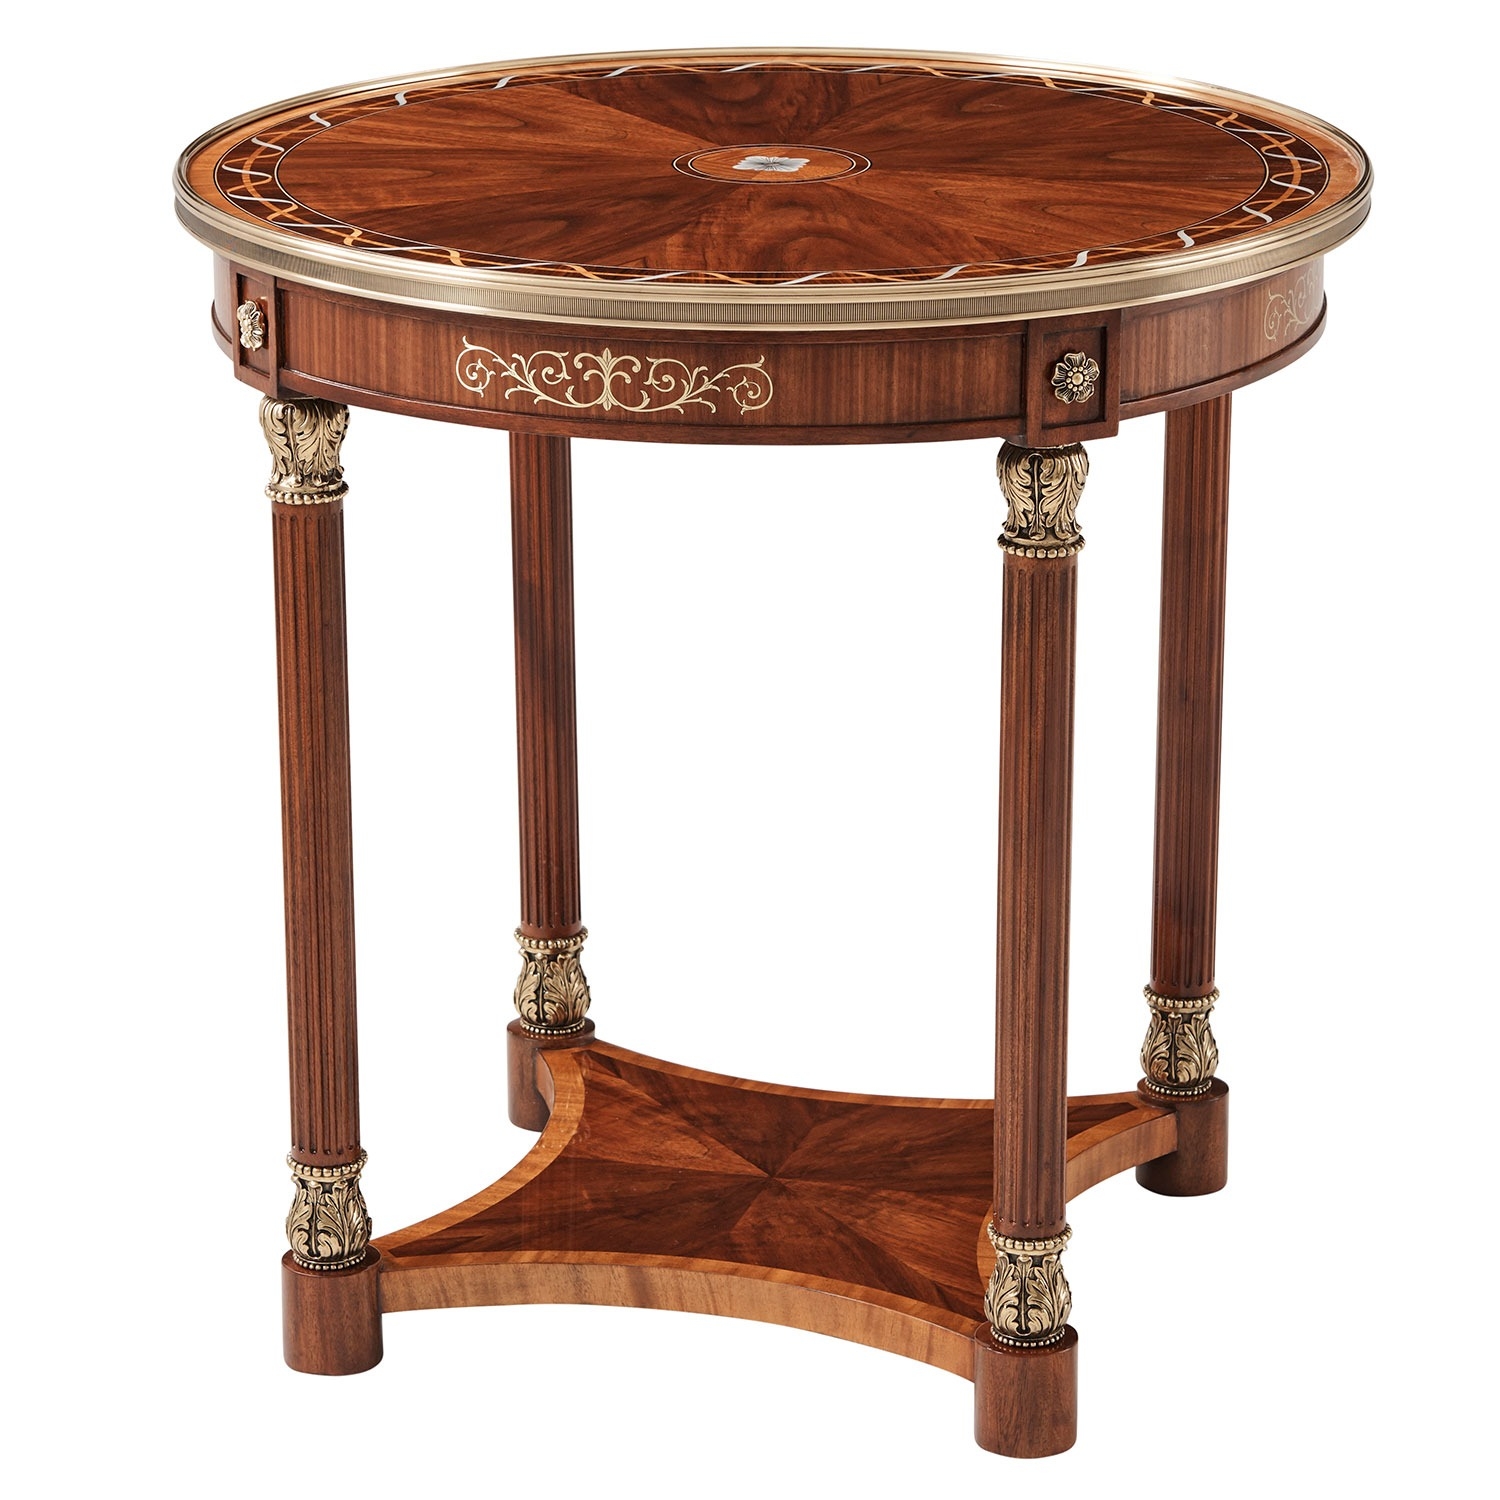 Theodore Alexander Mahogany Side or Lamp Table with floral inlay